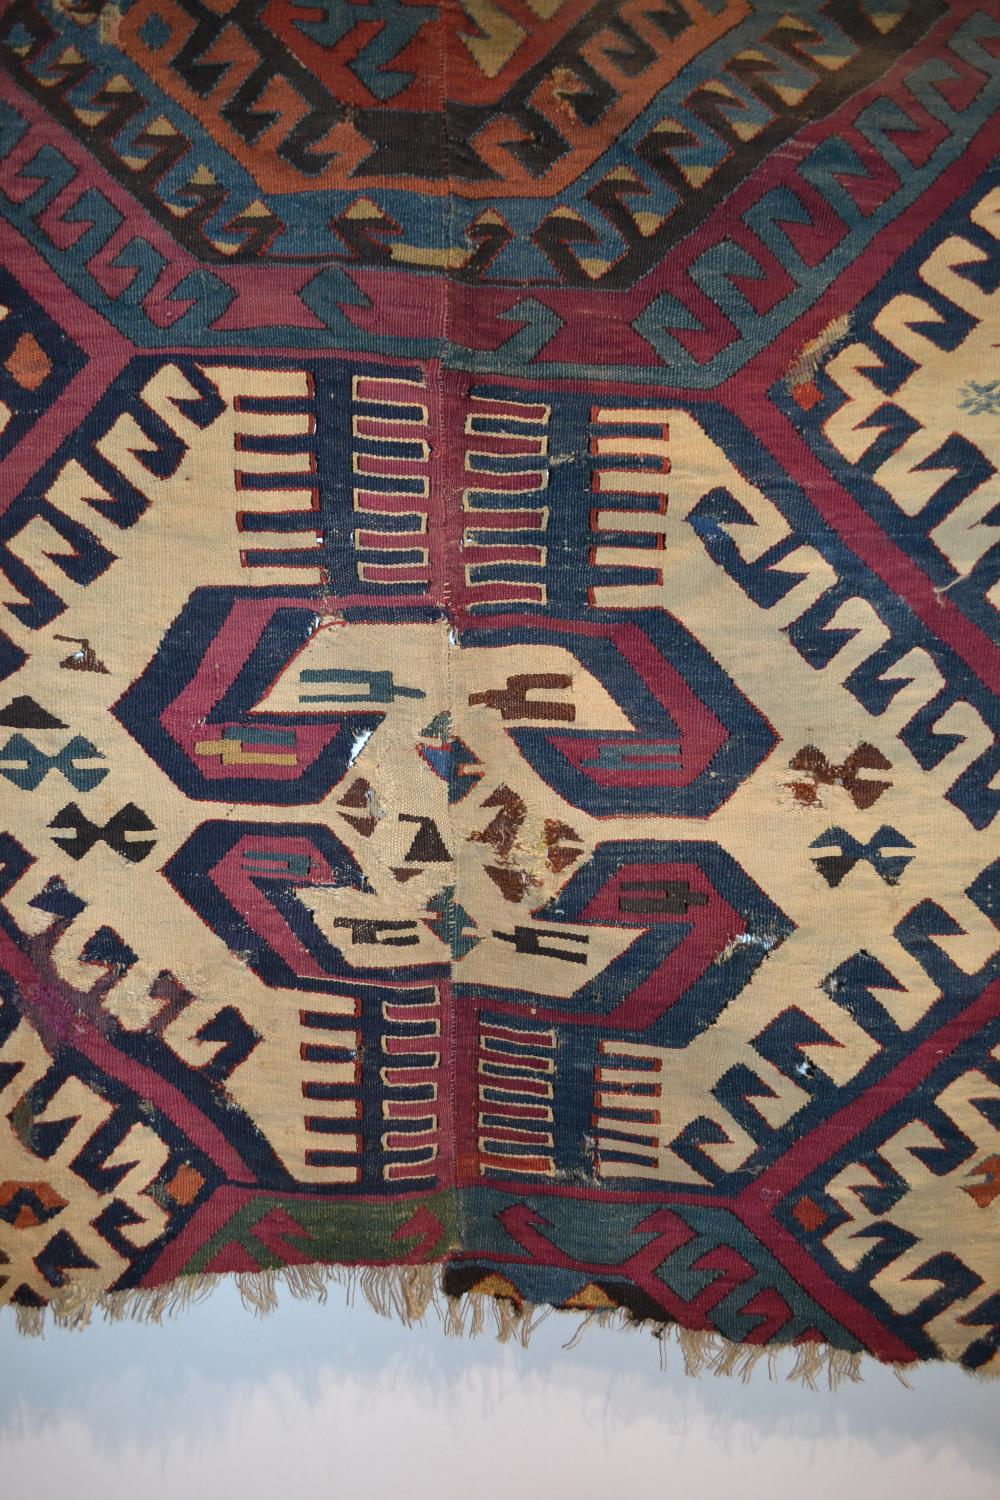 Fragmented Konya kelim, central Anatolia, second half 19th century, 7ft. 9in. x 5ft. 2.36m. x 1.52m. - Image 4 of 5